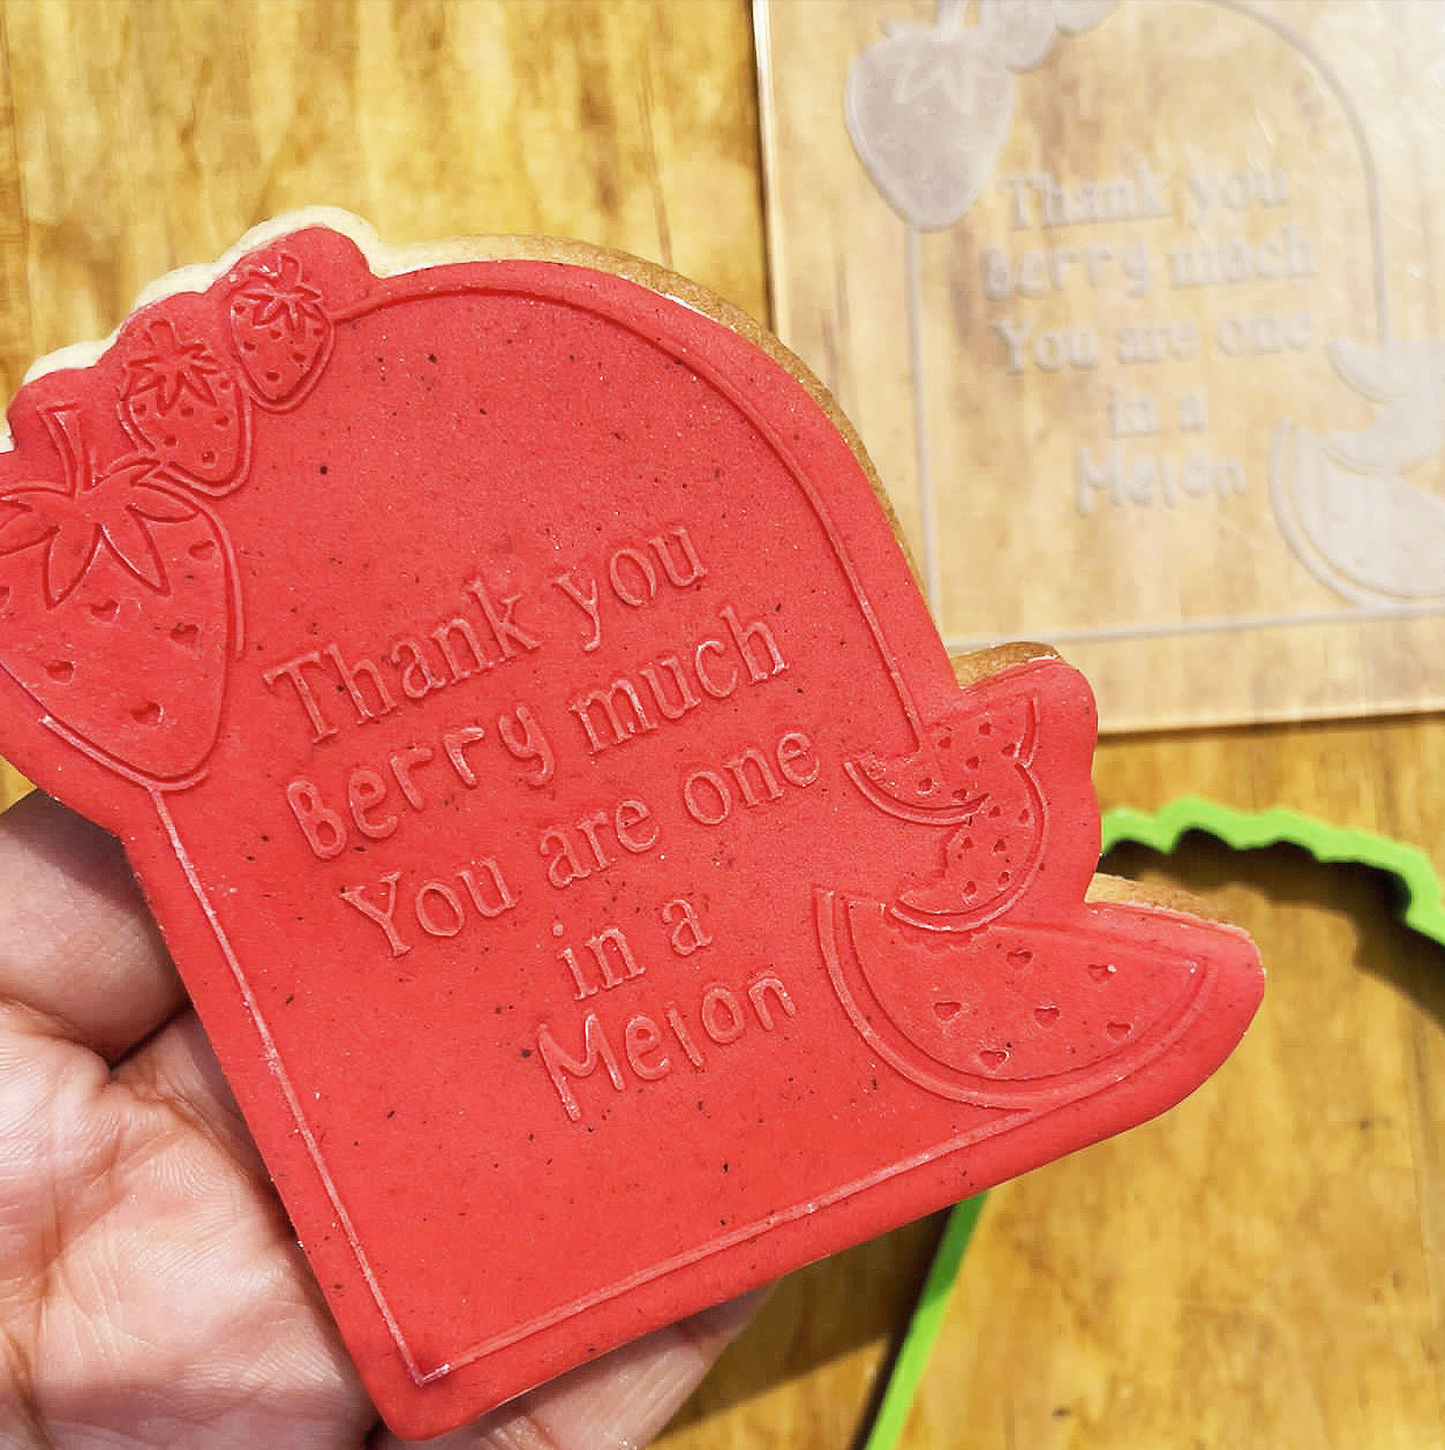 Thank you berry much you are one in a Melon debossing + matching cutter MEG cookie cutters